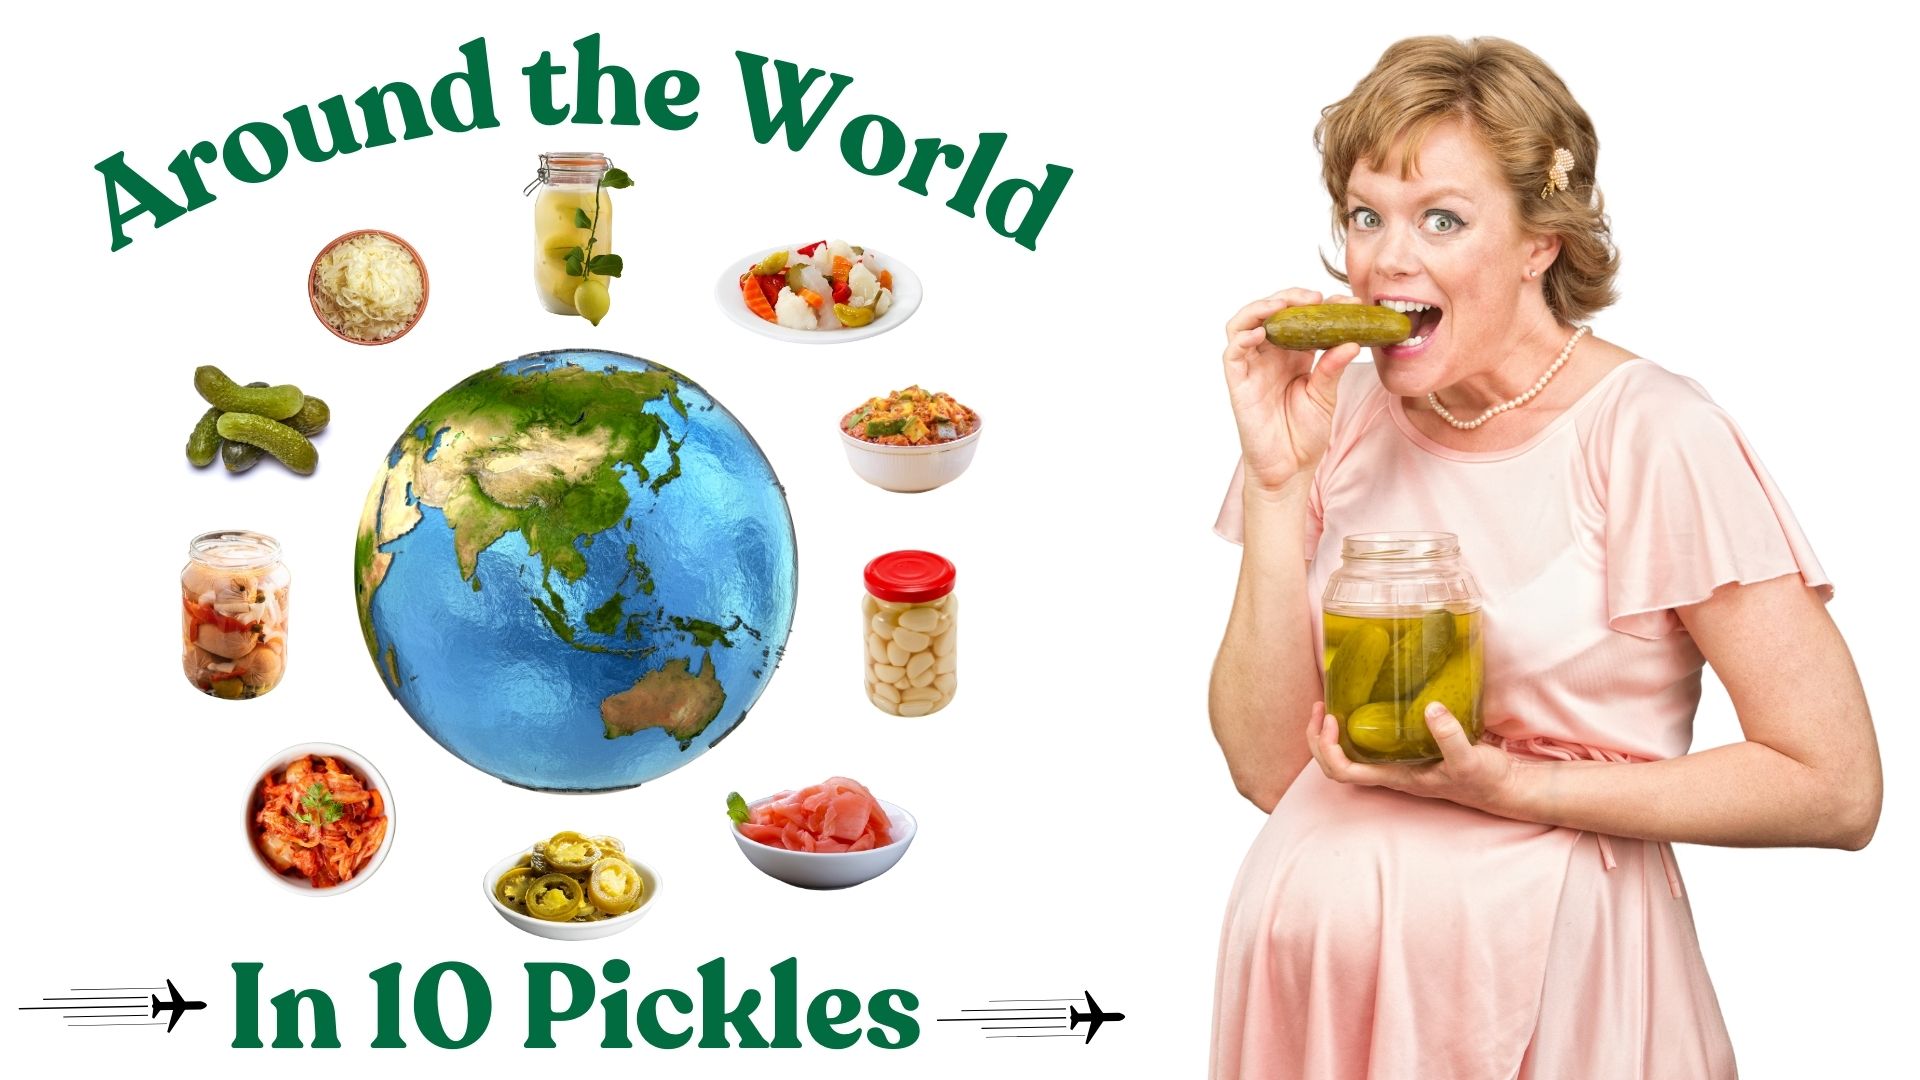 Around the world in 10 pickles